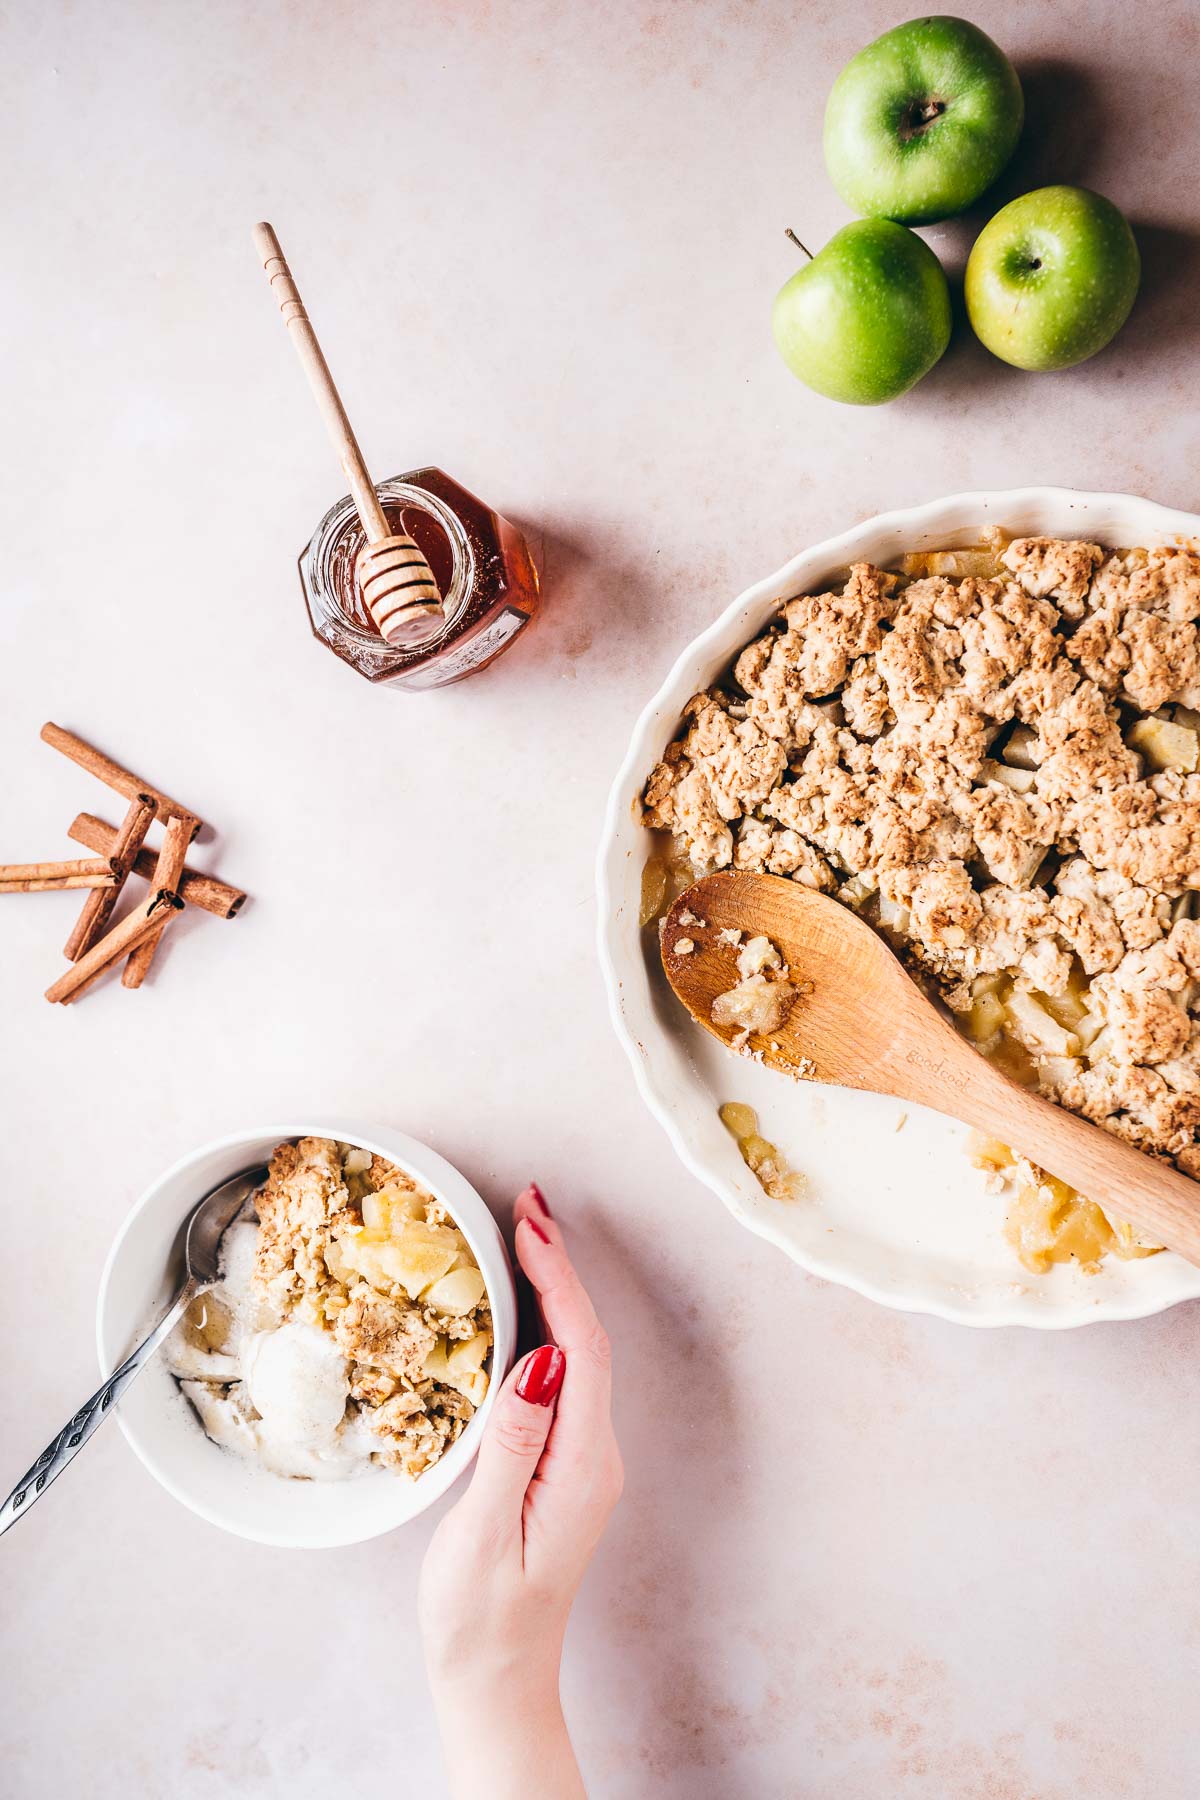 a hand cupping a white bowl filled with gluten free apple crisp made with honey and oats